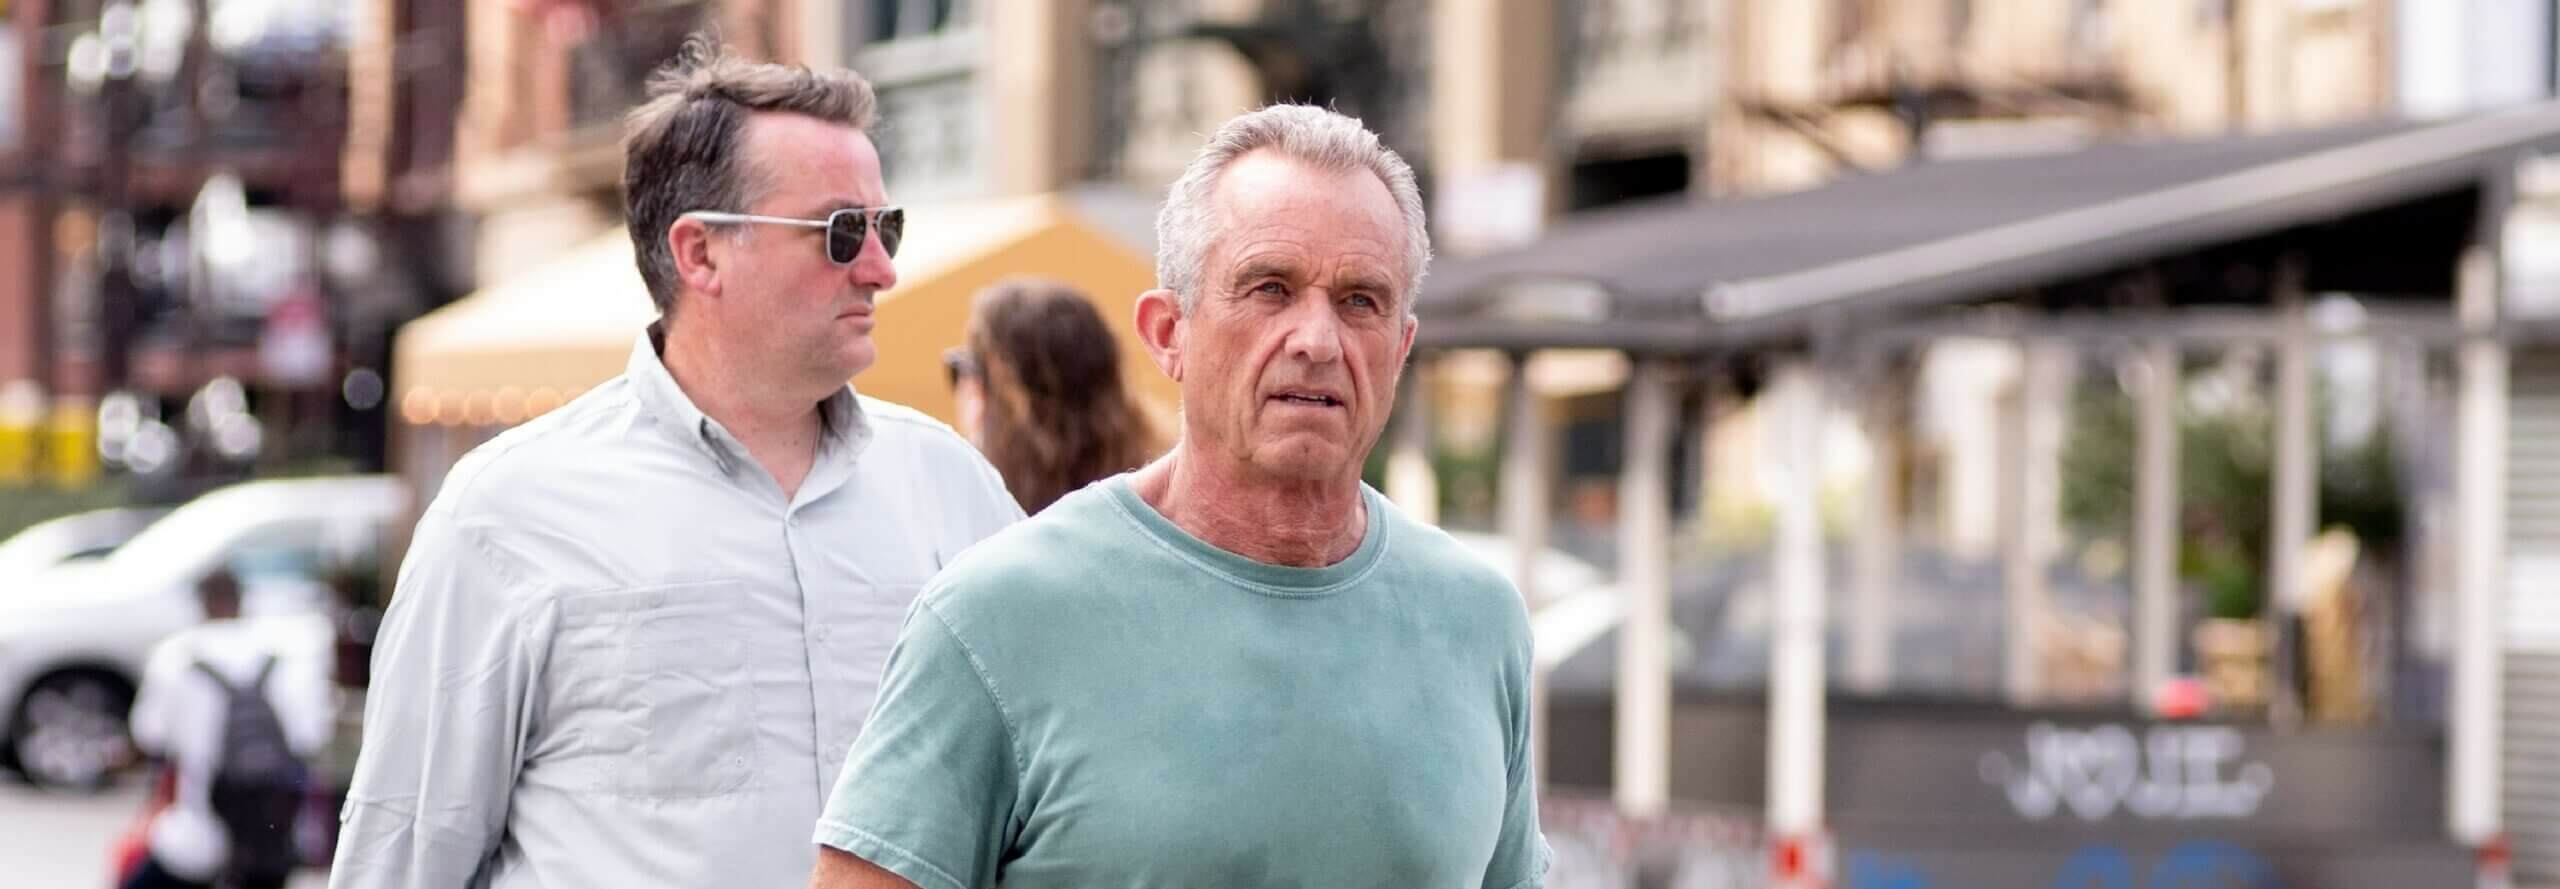 Robert F. Kennedy Jr. Says DHS Denied His Request for Secret Service Protection Despite His 'Unique and Well Established' Security Risks